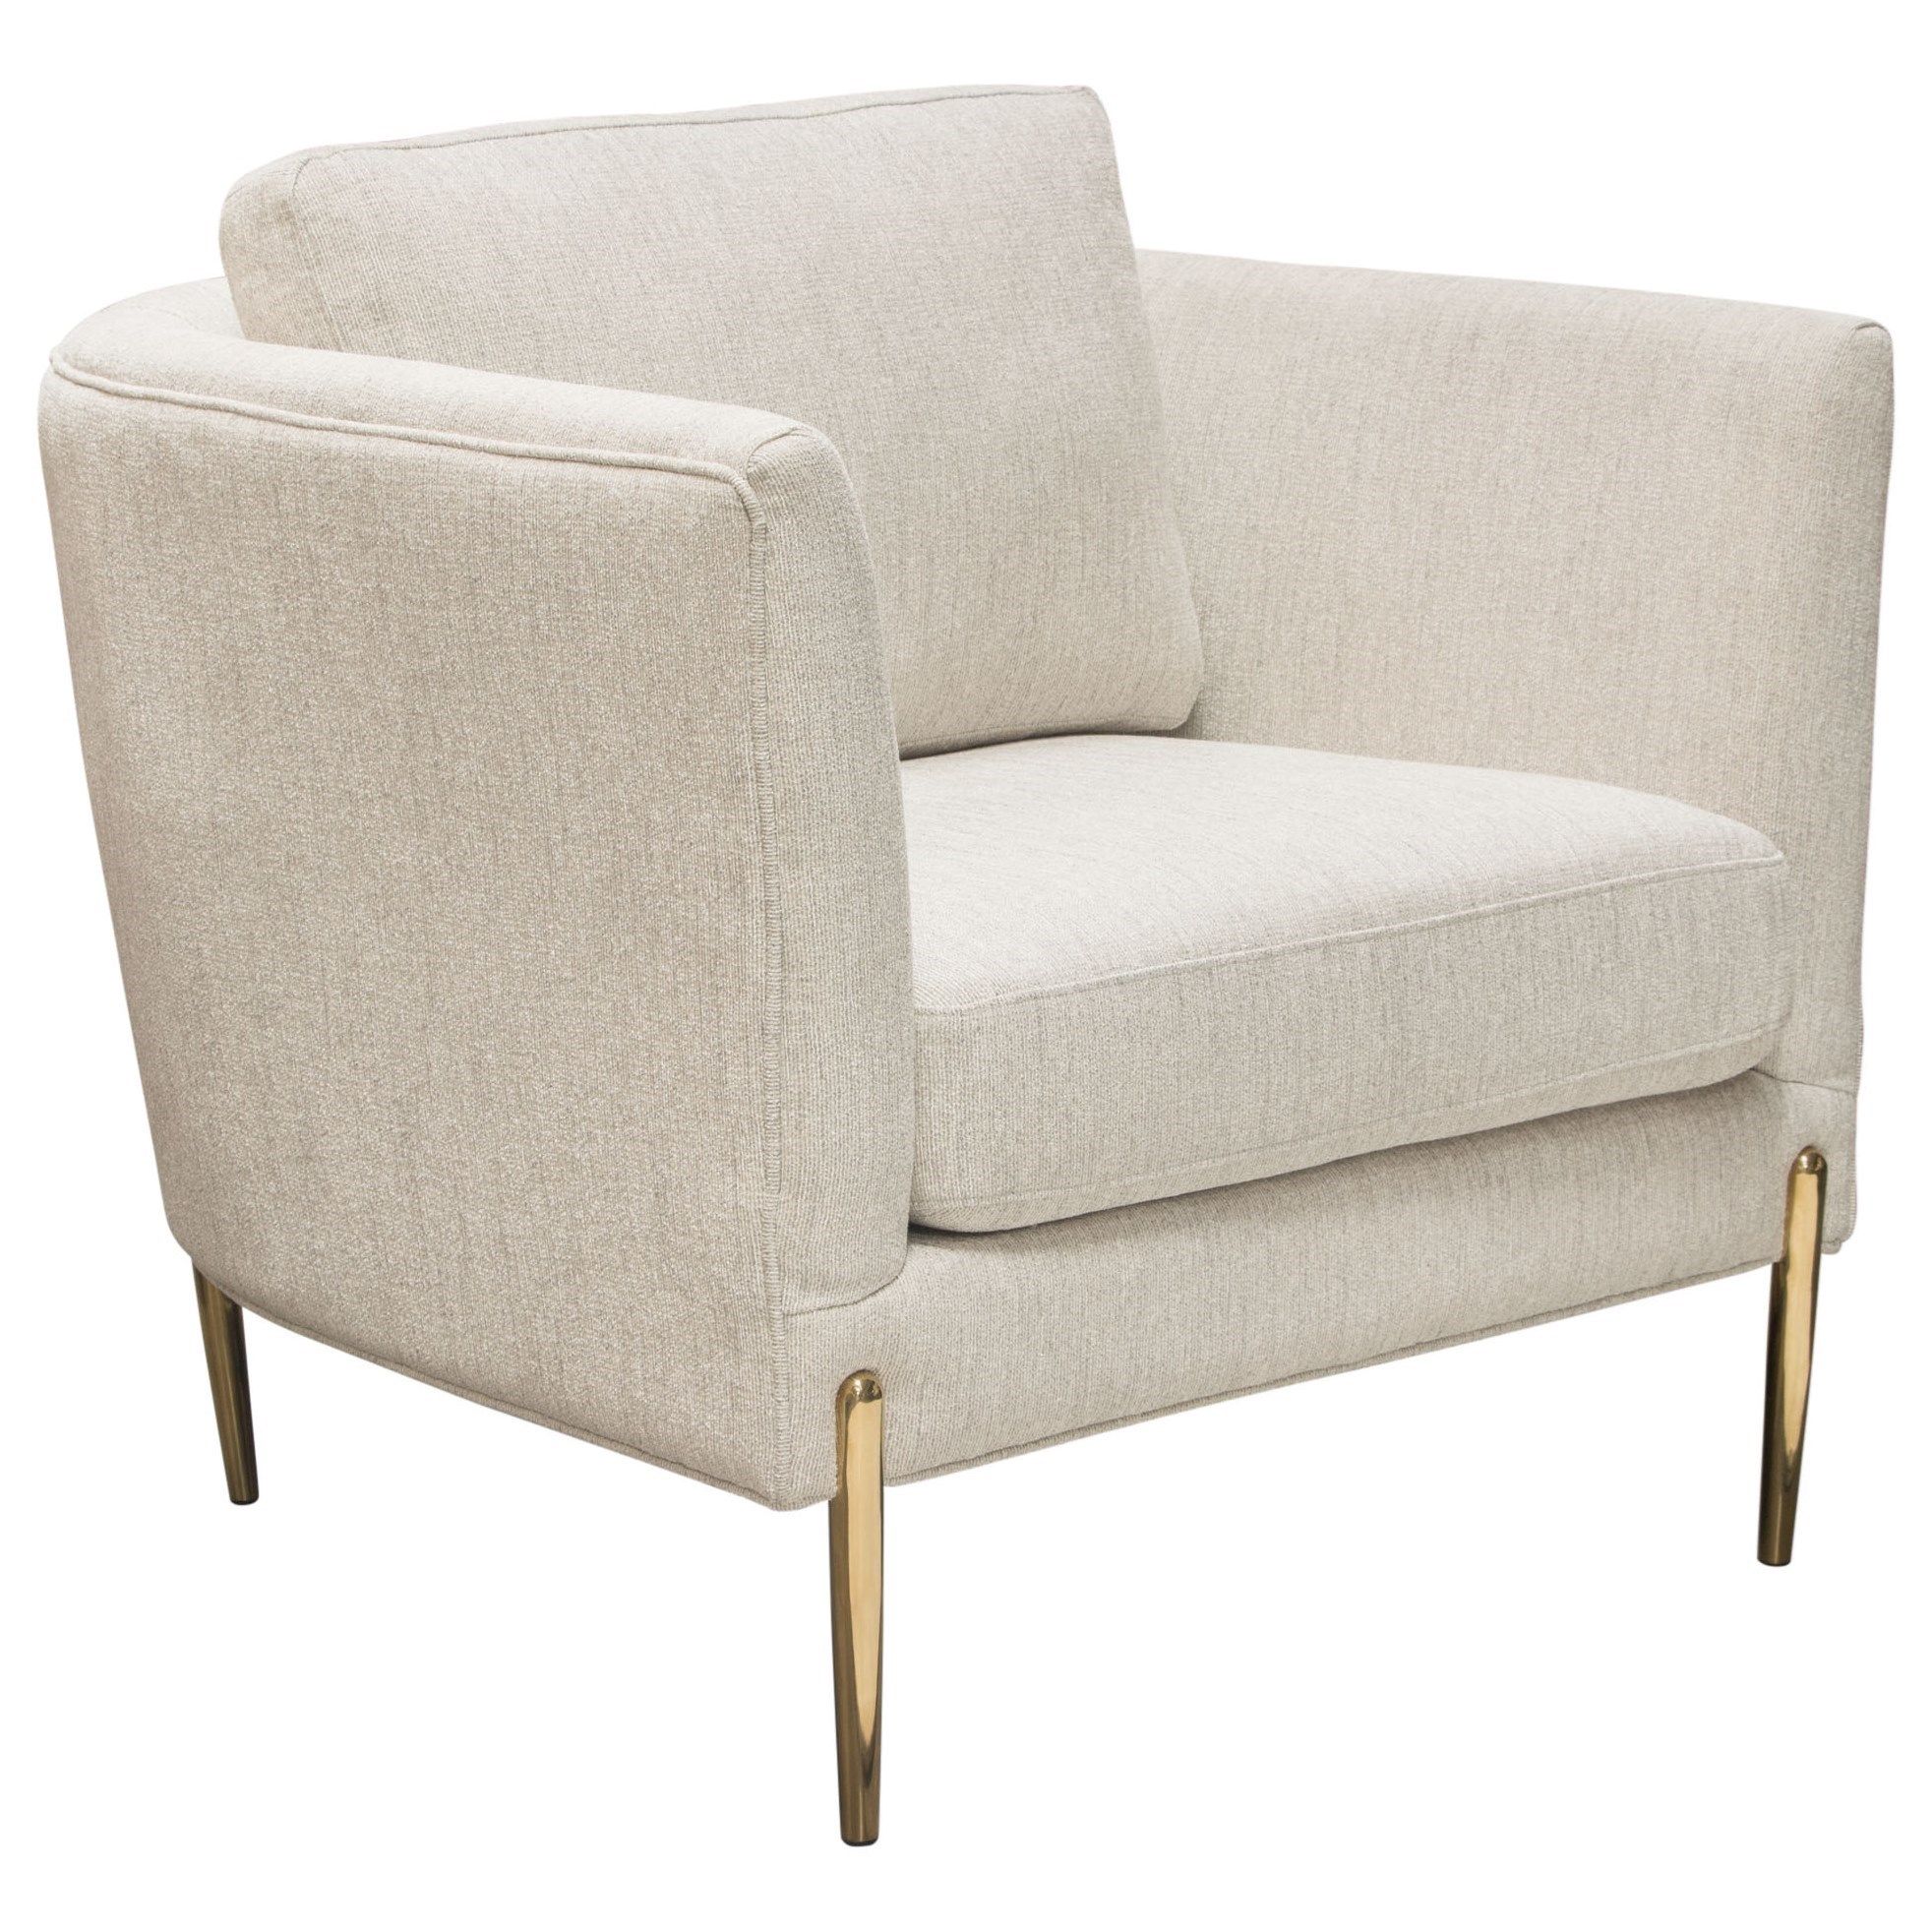 Diamond Sofa Furniture Lane Lanechcm Chair In Light Cream Fabric With With Regard To Cream And Gold Console Tables (View 8 of 20)